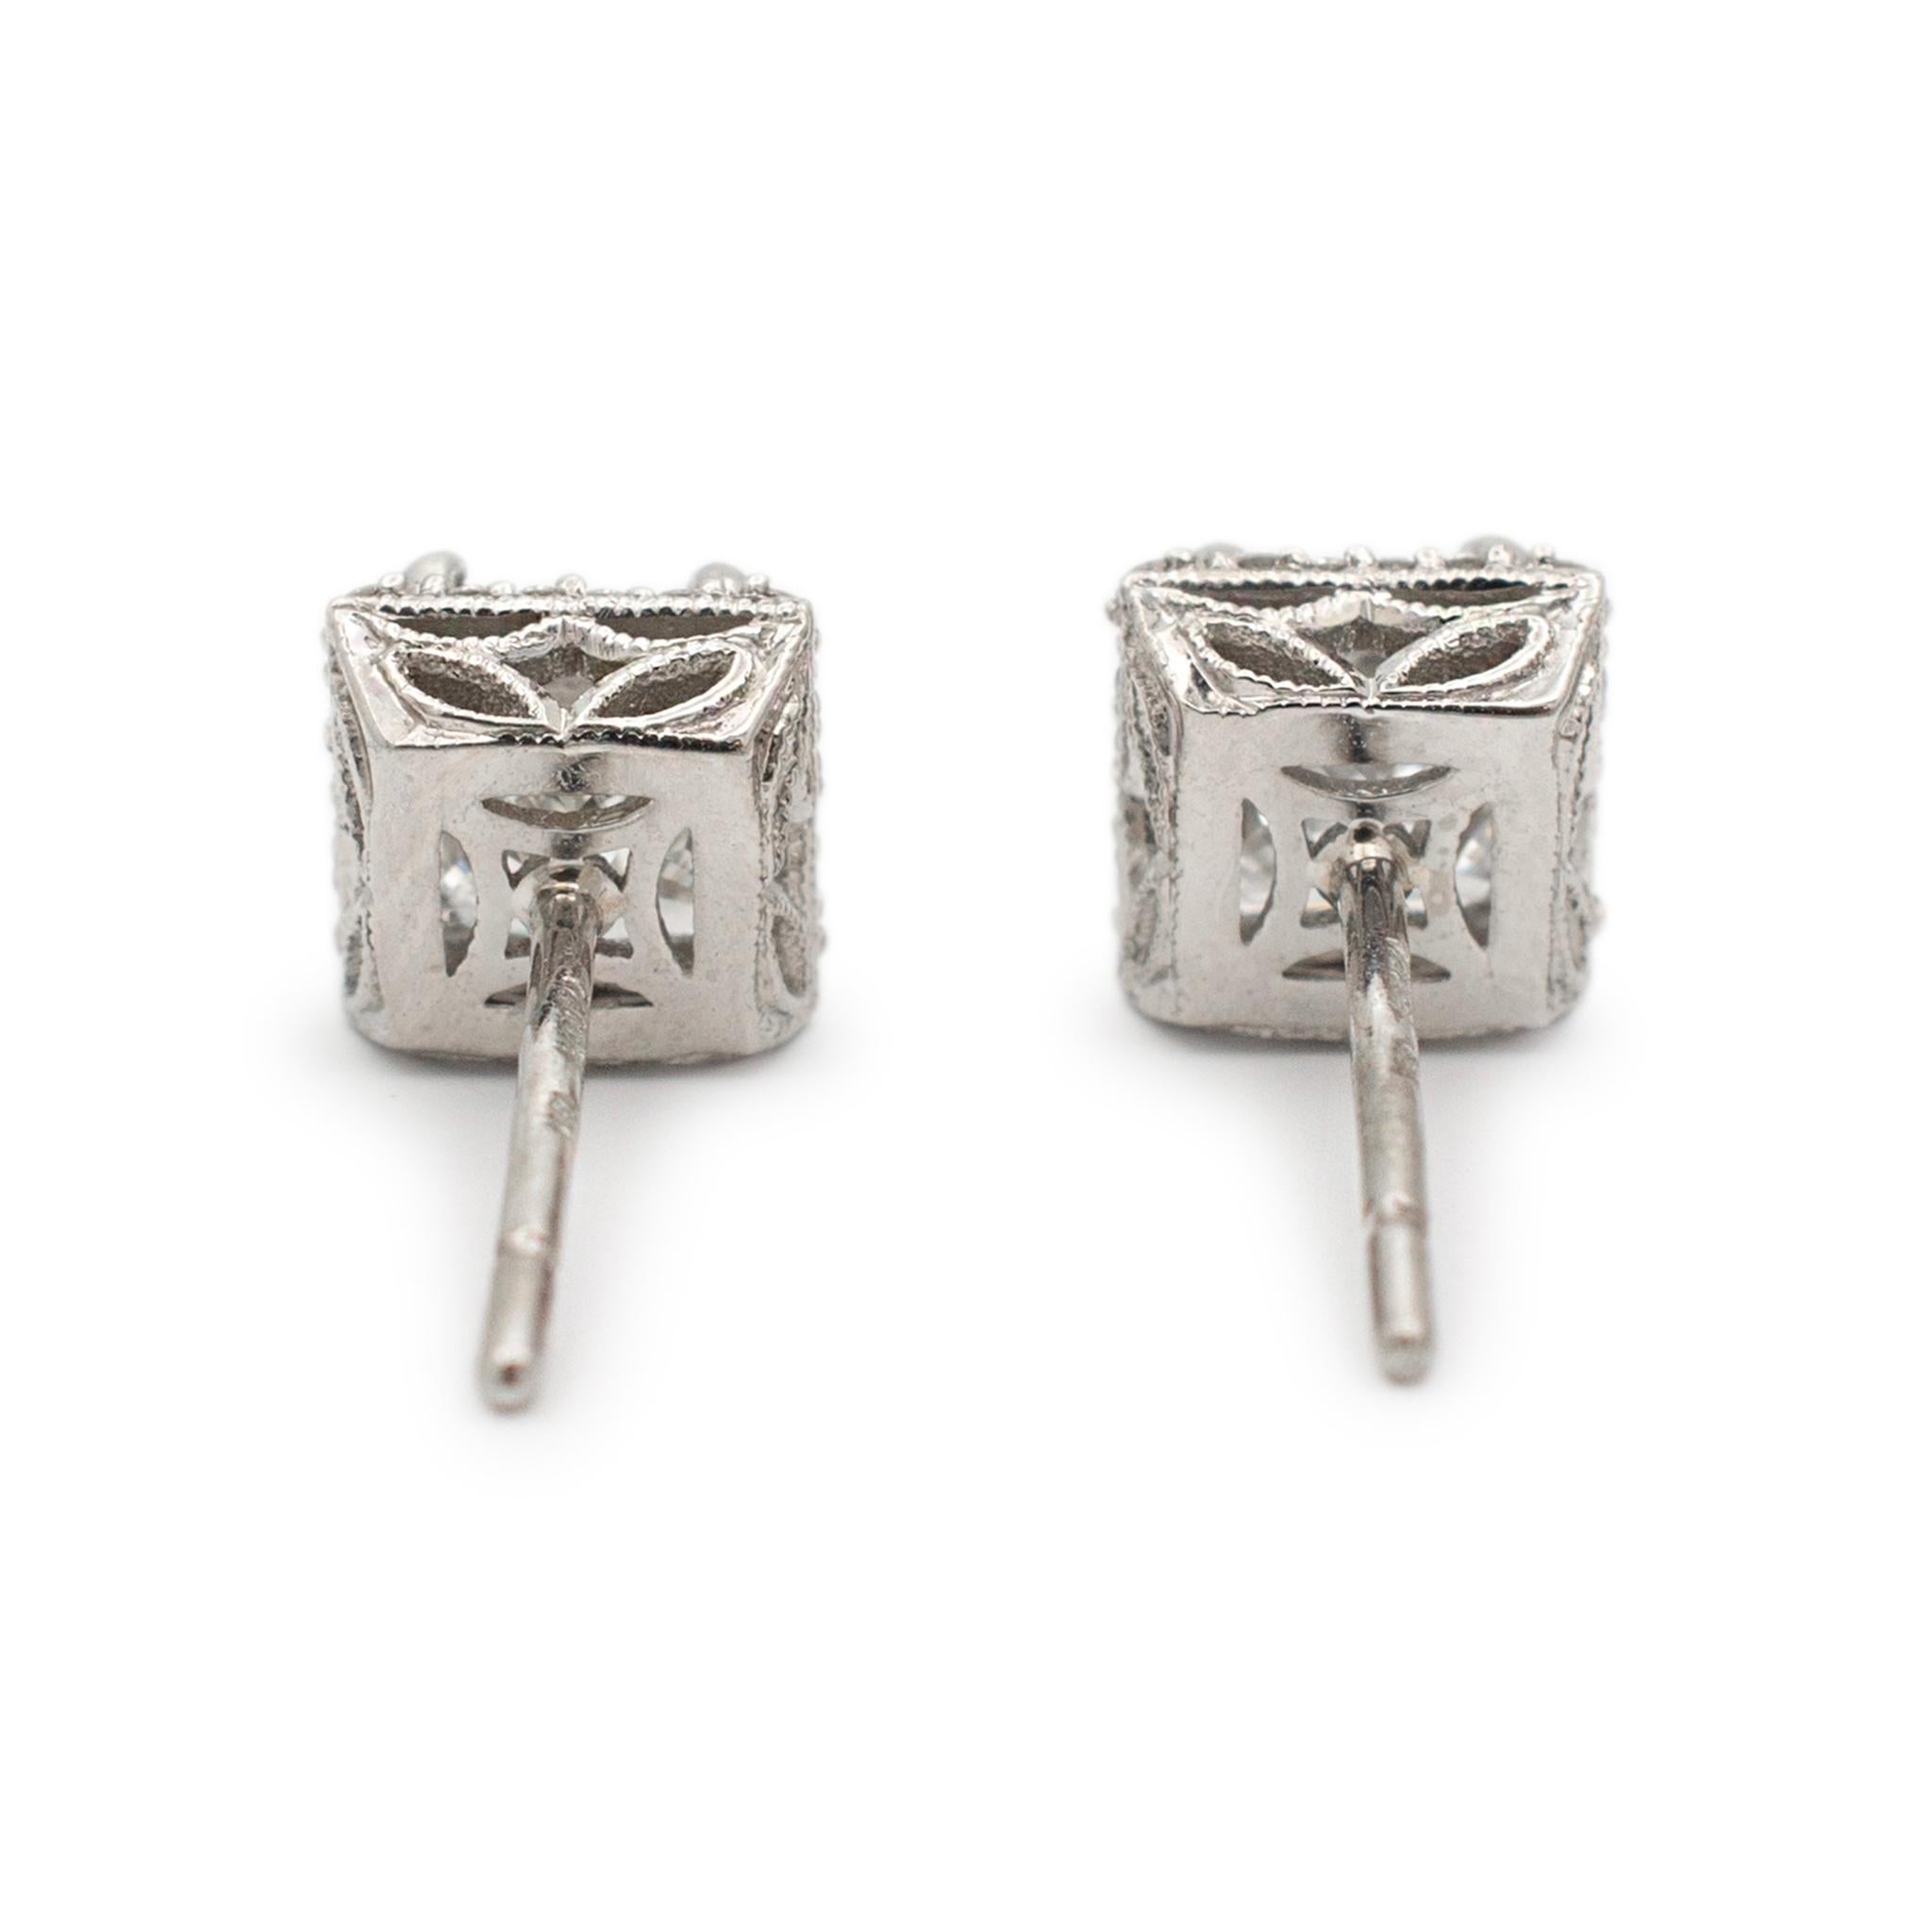 Brand: Tacori

Gender: Ladies

Metal Type: 18K White Gold

Length: 0.50 Inches

Width: 6.50 mm

Weight: 2.10 grams

Ladies filigree-style 18K white gold diamond halo stud earrings with push backs. Engraved with 